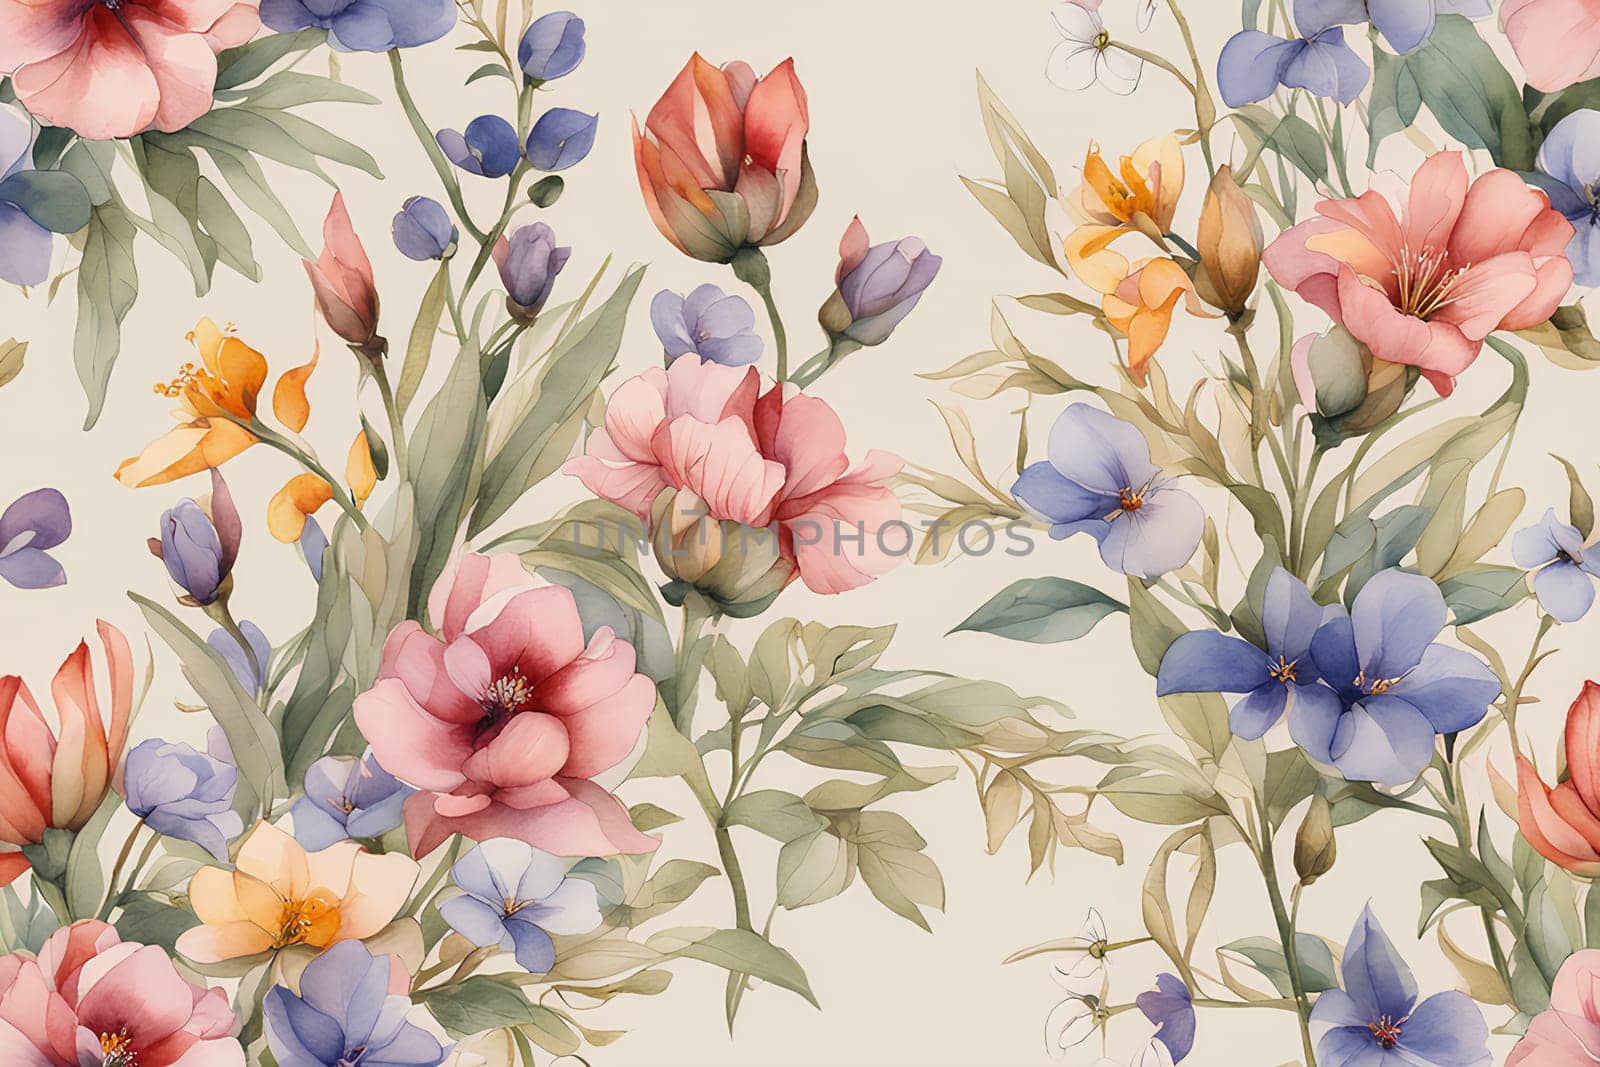 Abstract background of watercolor flowers, pink and beige colors by Annu1tochka